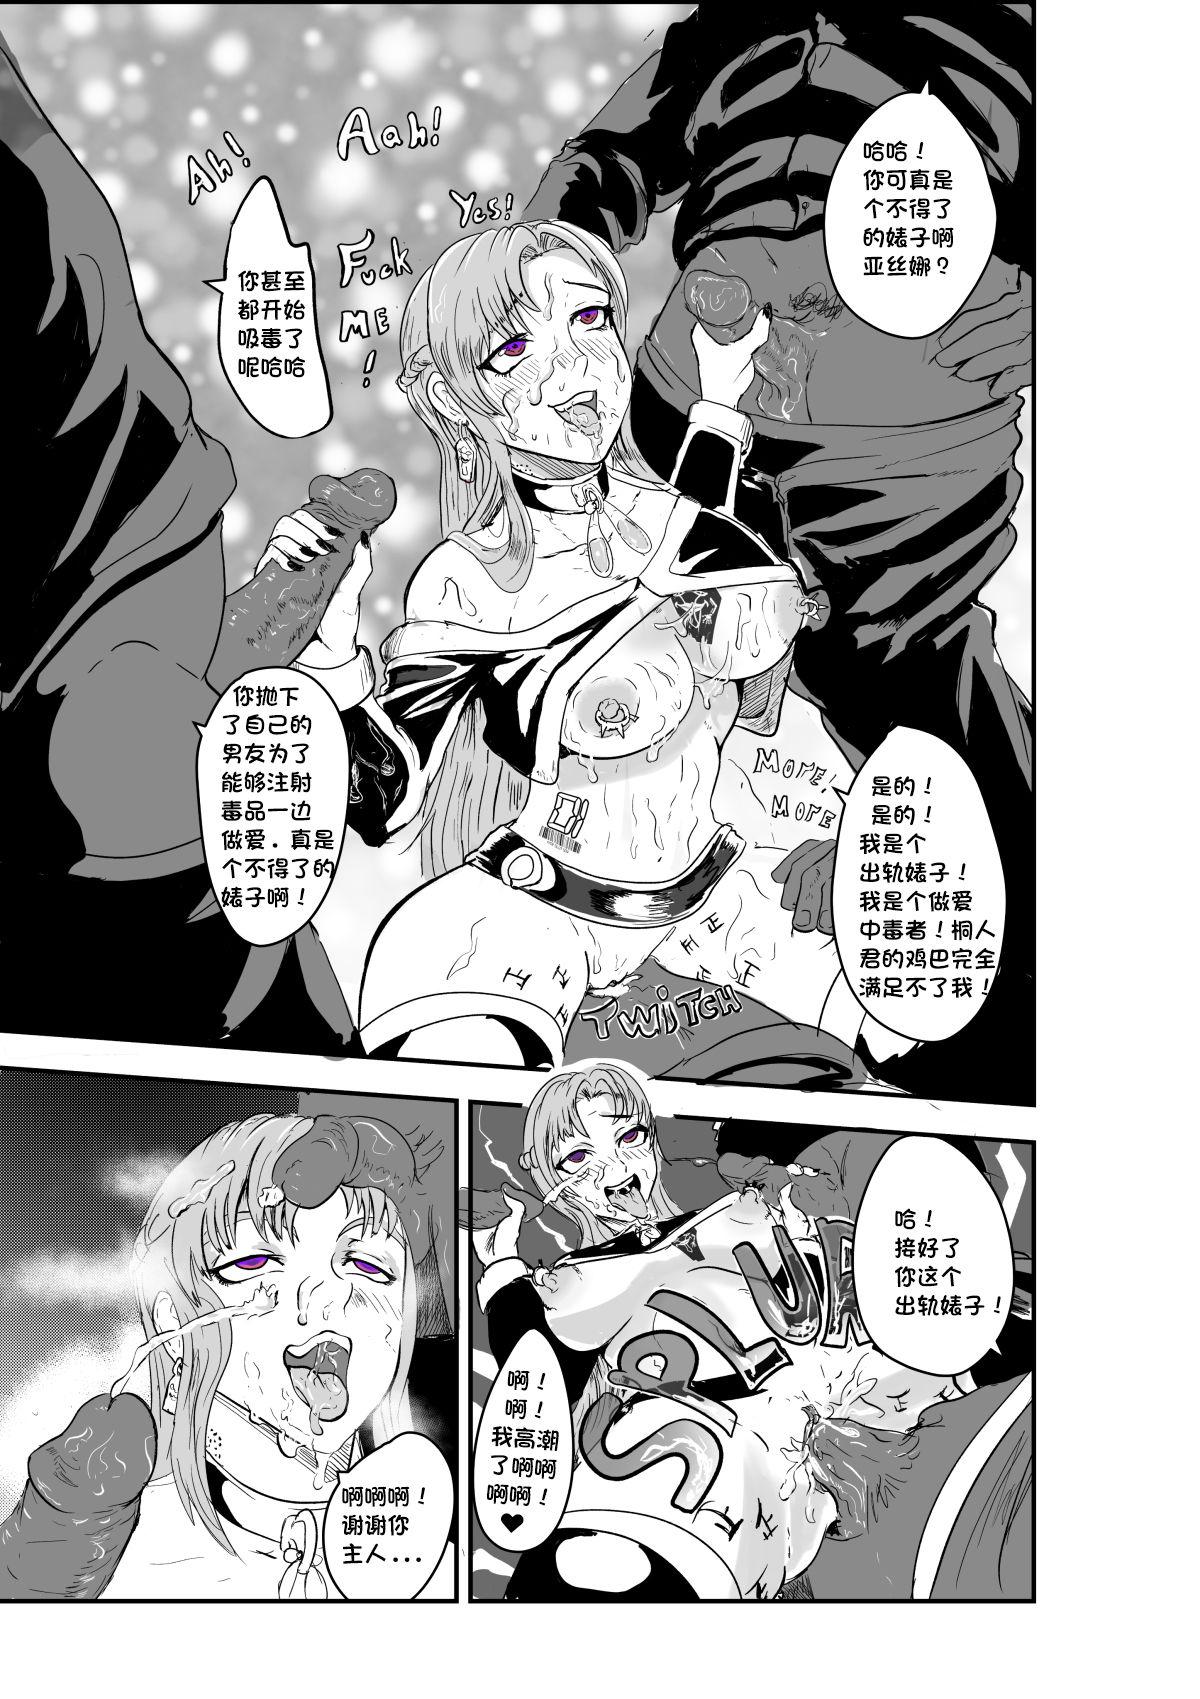 Latino SAO Lustful Obedience Release - Sword art online Thai - Page 5